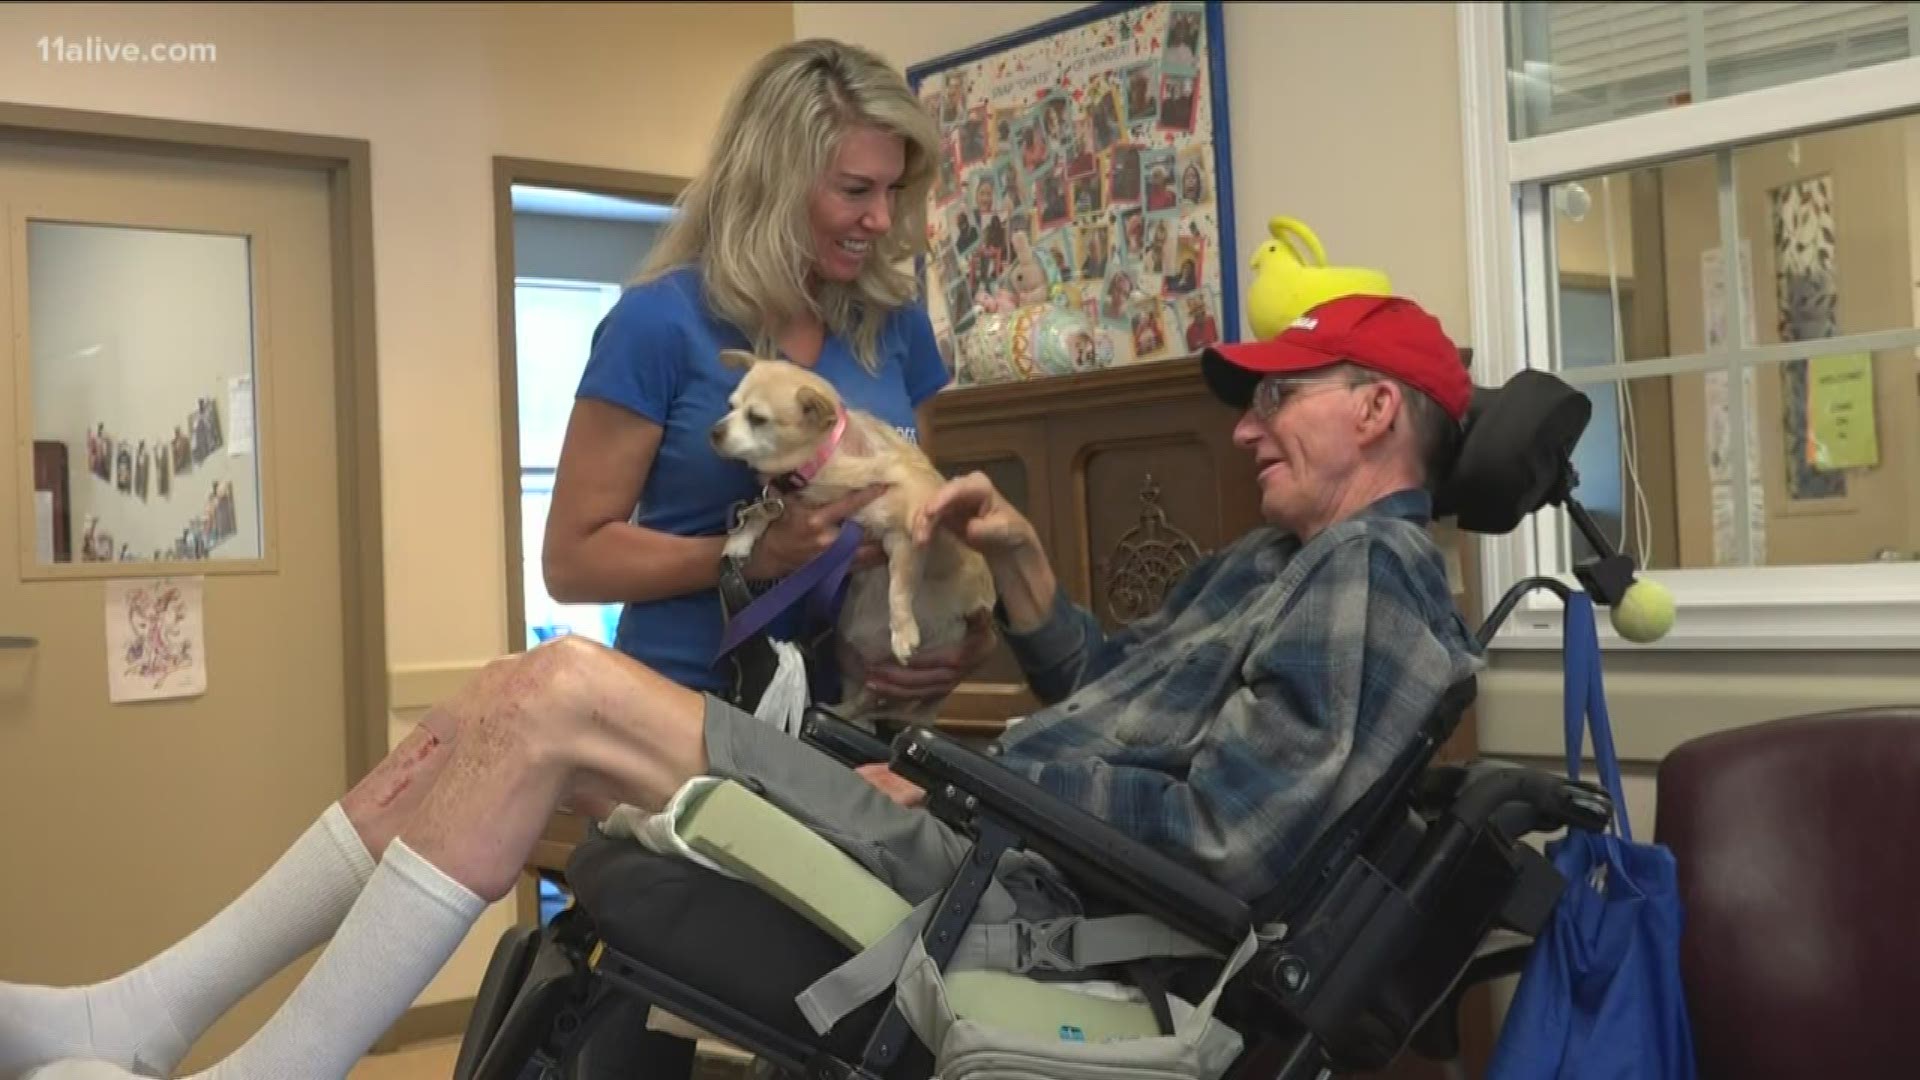 Frankie and Andy's Place takes in senior dogs abandoned by their families to give them a happy place to spend their final days.